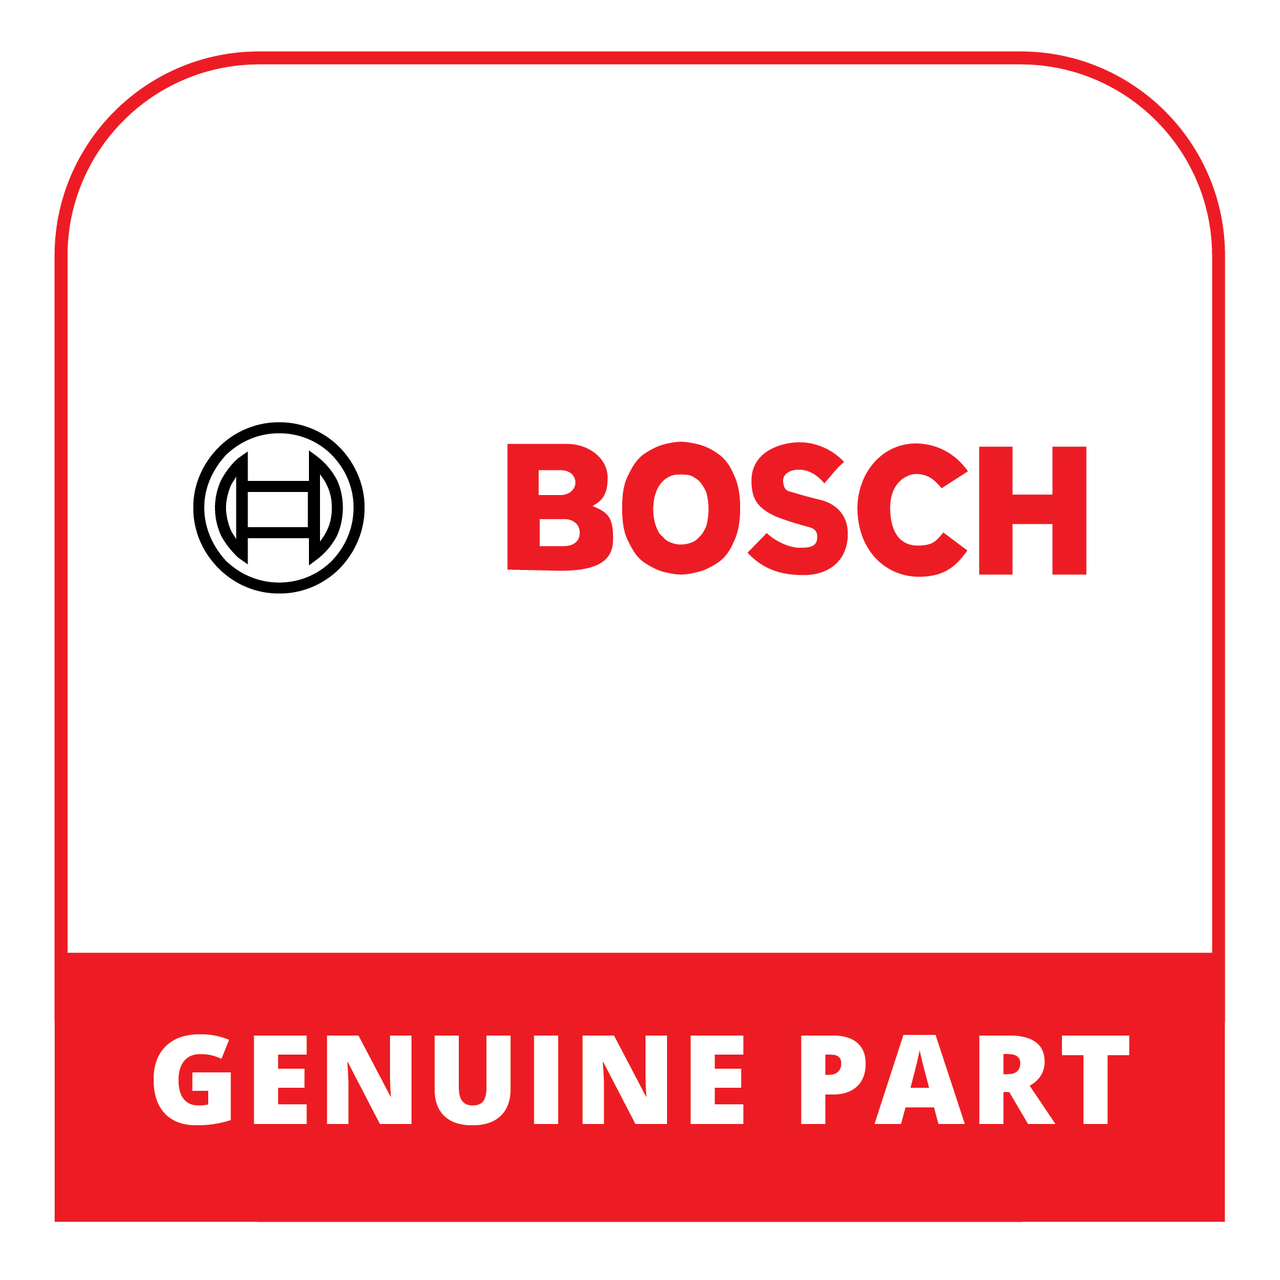 Bosch (Thermador) 12028843 - Display Module Programmed - Genuine Bosch (Thermador) Part